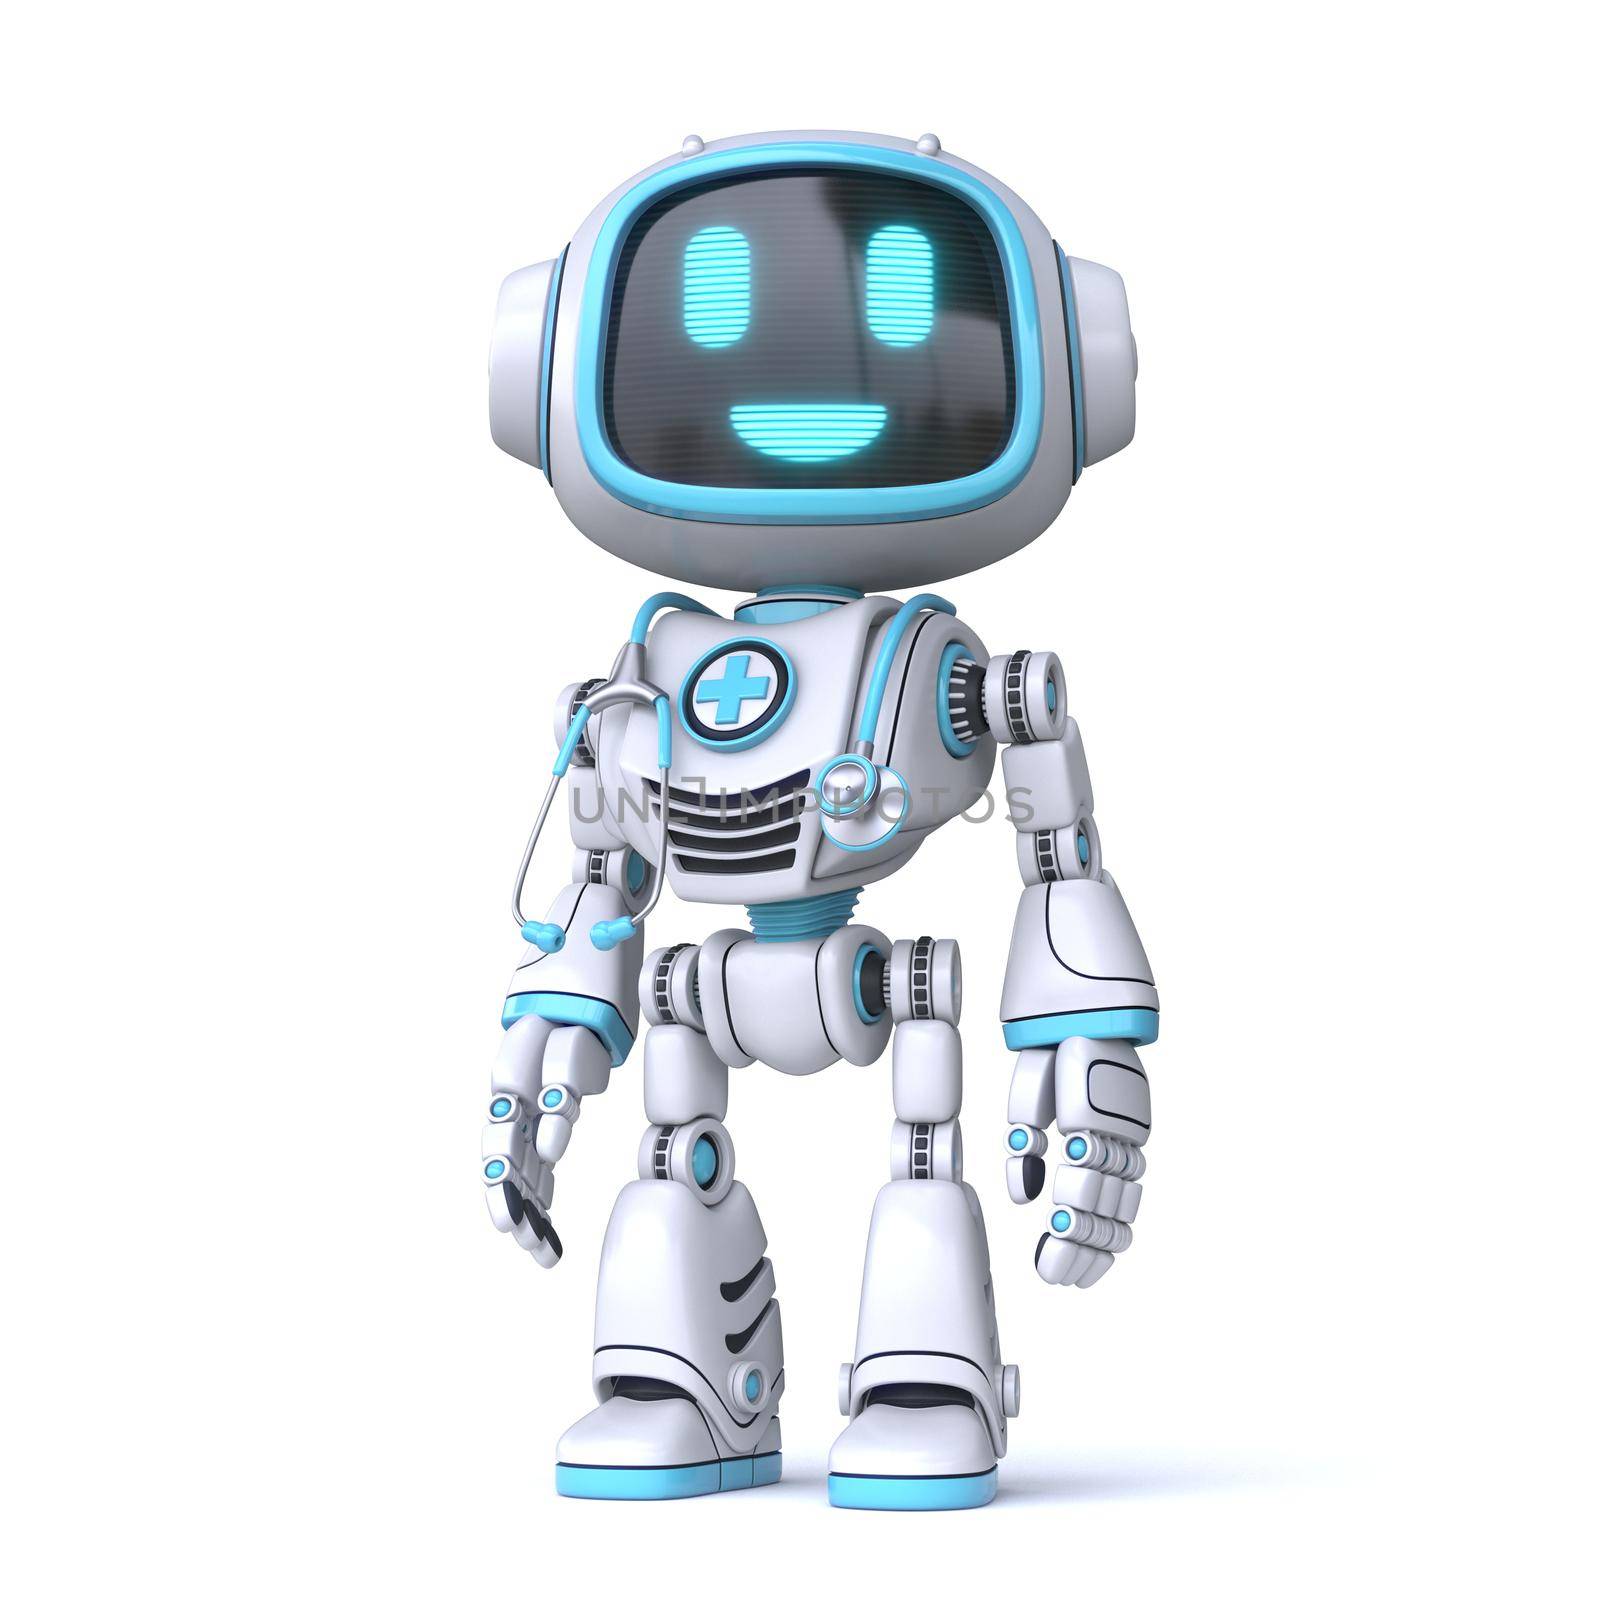 Cute blue robot doctor with stethoscope 3D by djmilic